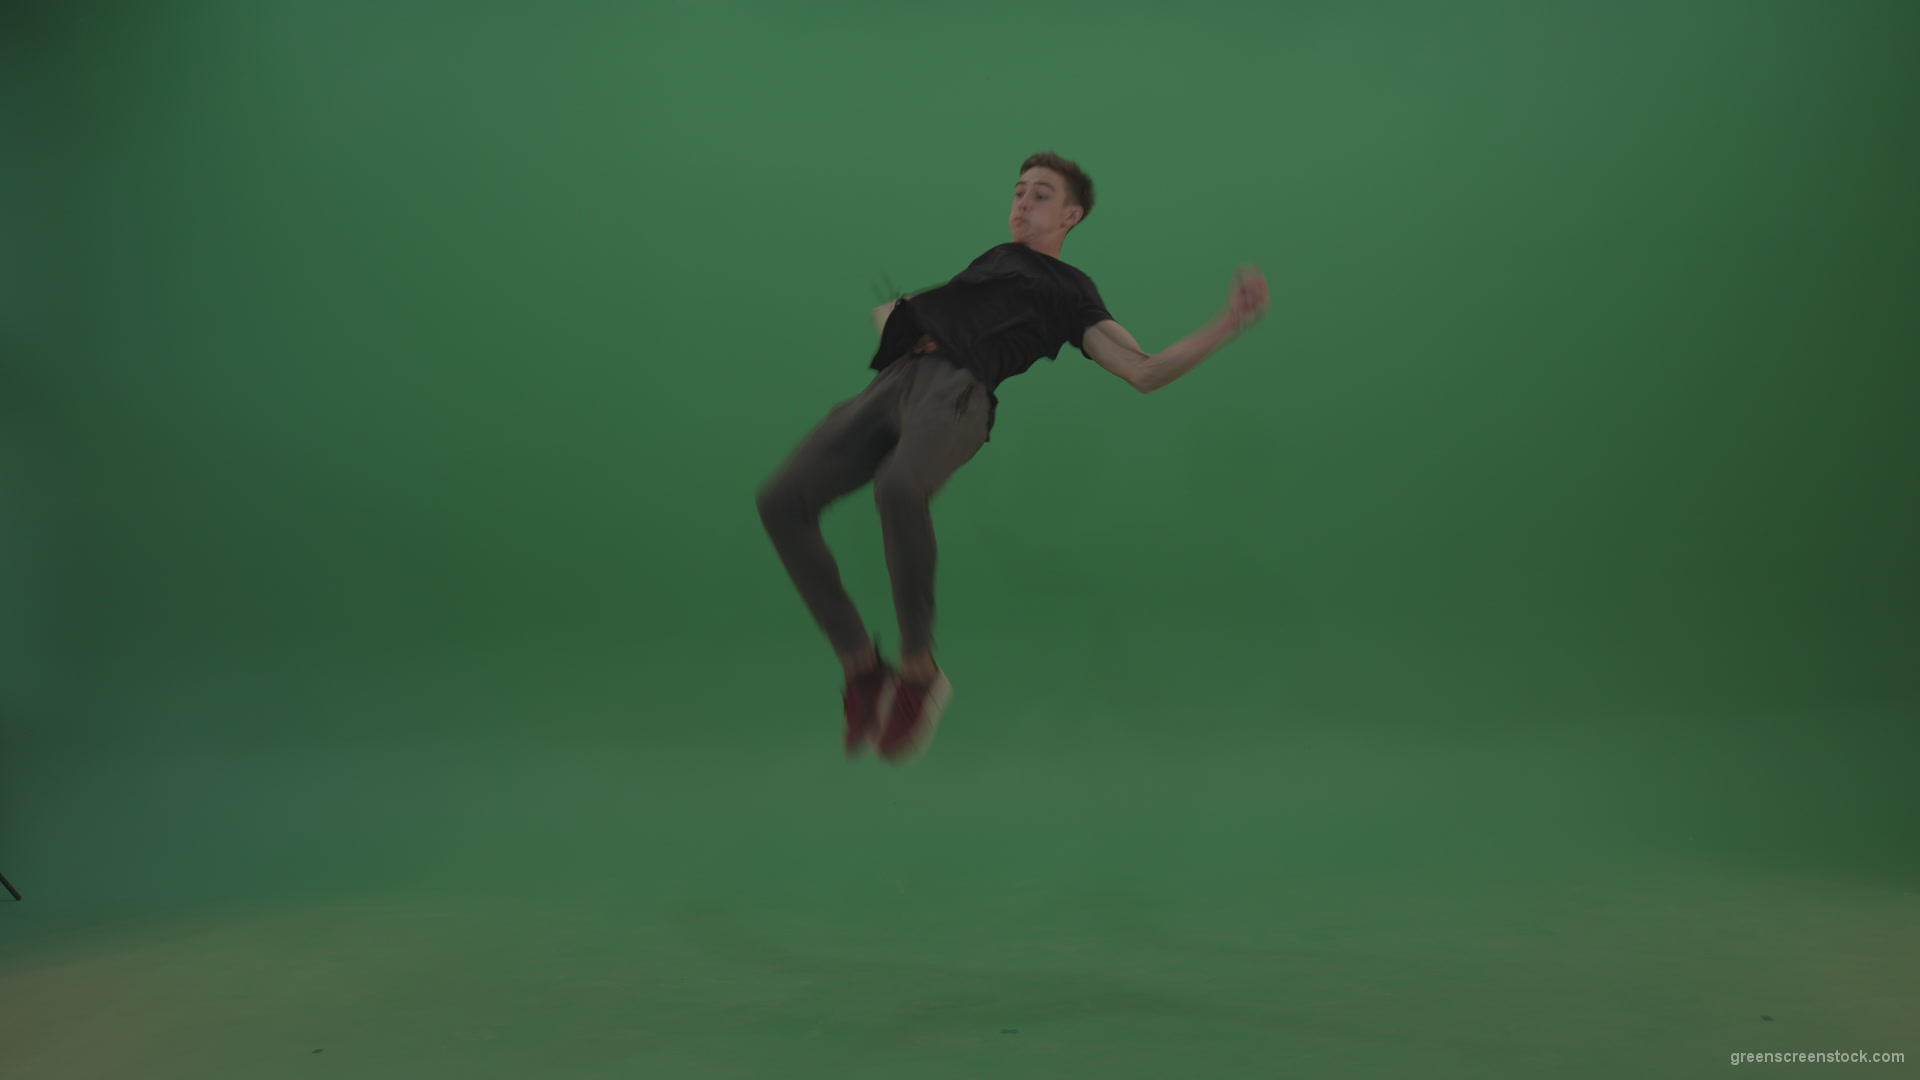 Young_Brunette_Boy_Wearing_Black_Clothes_Does_Perfect_Back_Flip_On_Green_Screen_Chroma_Key_Wall_Background_007 Green Screen Stock